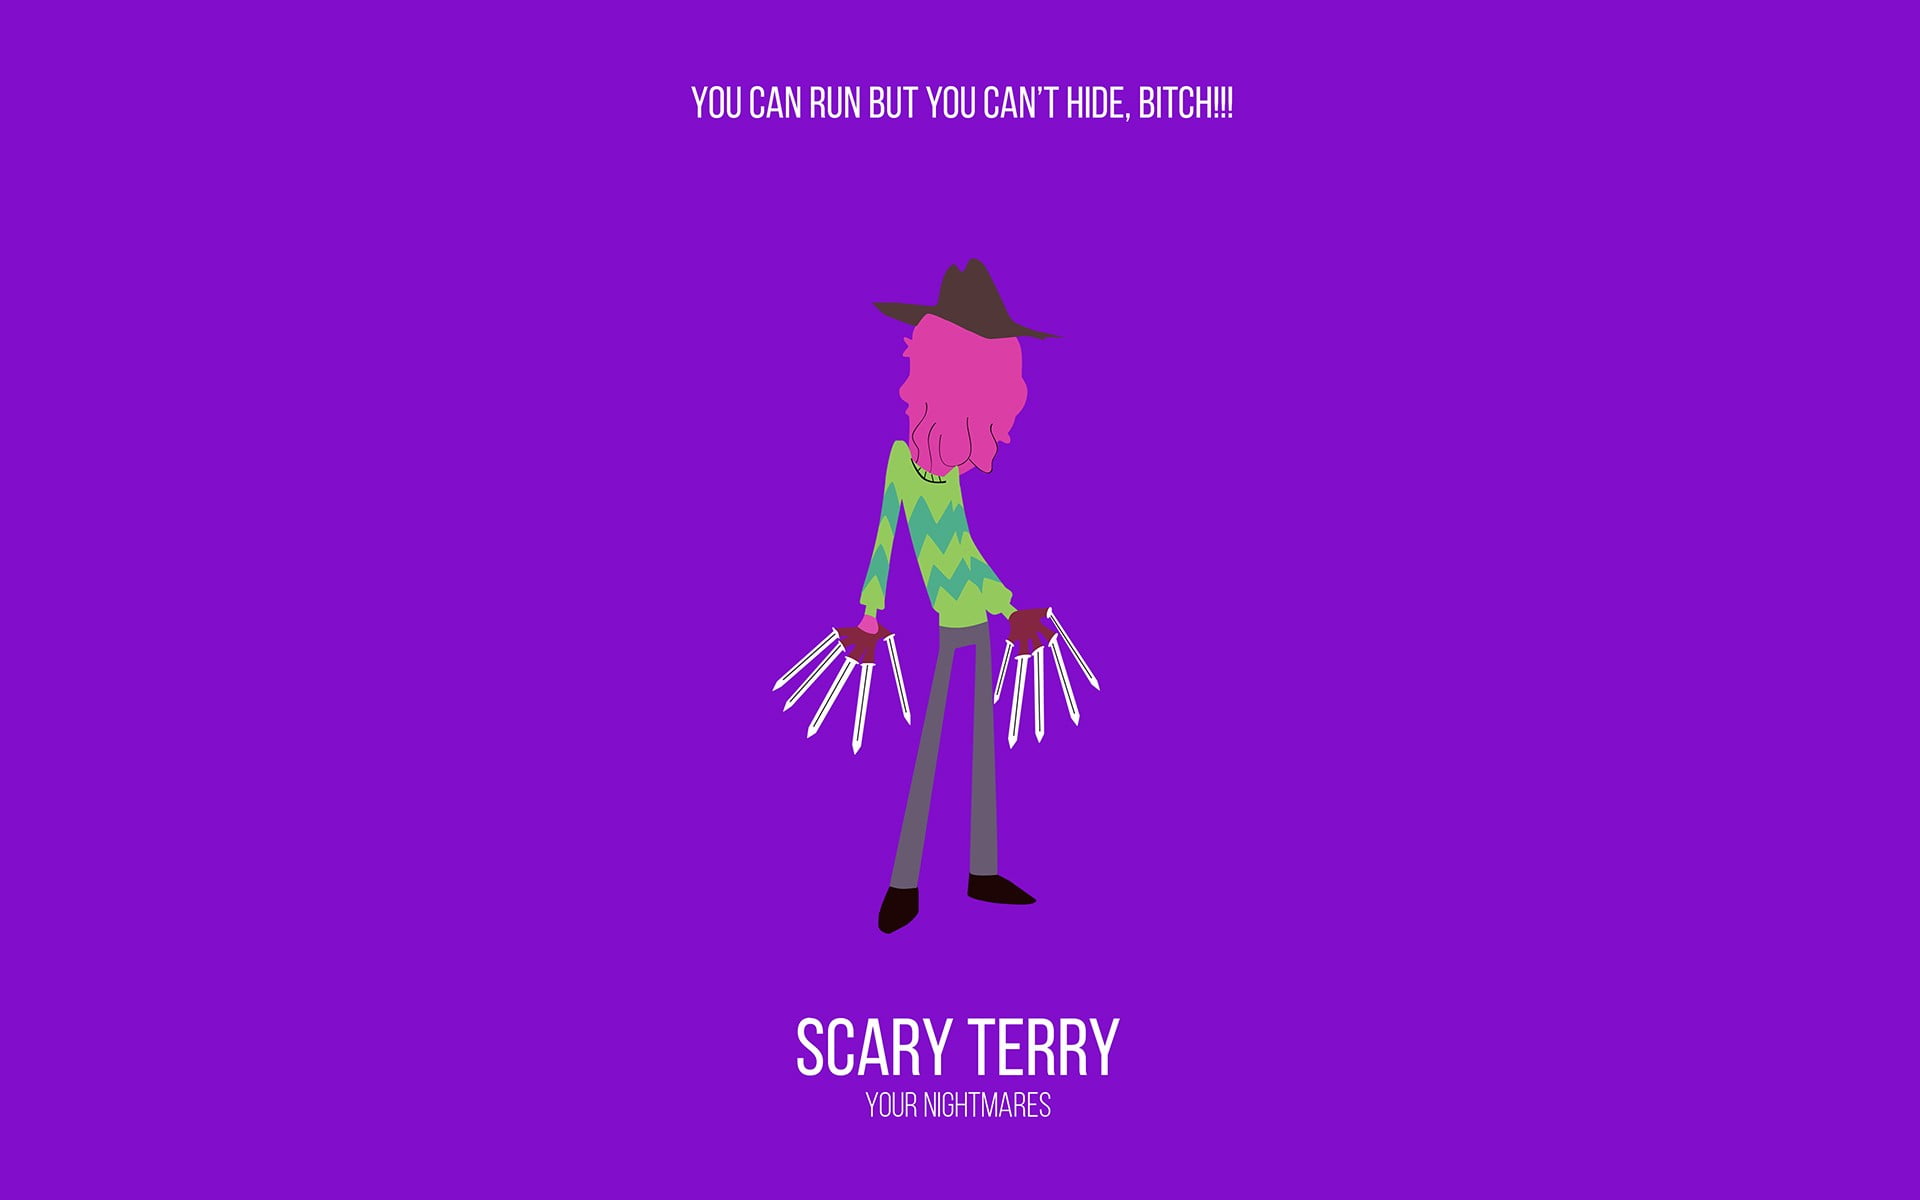 Scary Terry wallpaper, Rick and Morty, minimalism, cartoon, purple